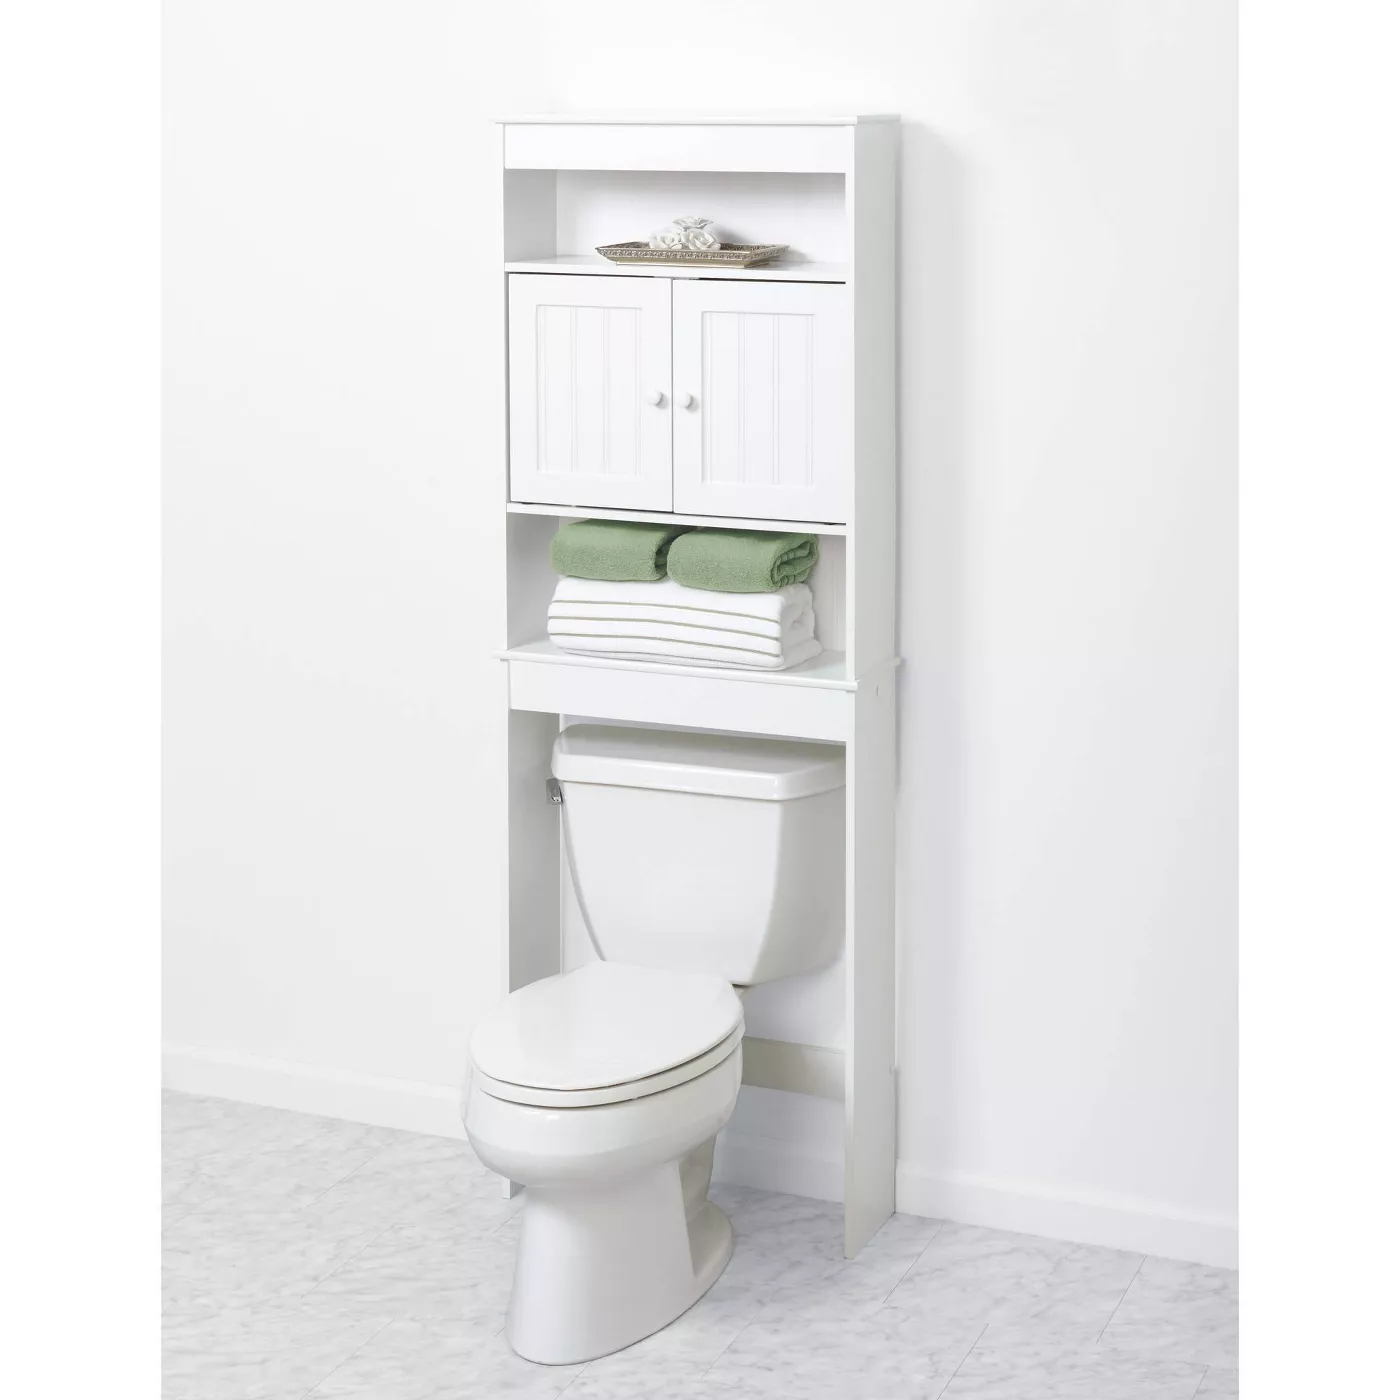 Country Cottage Space Saver 3 Shelves Wood White - Zenna Home - image 1 of 3